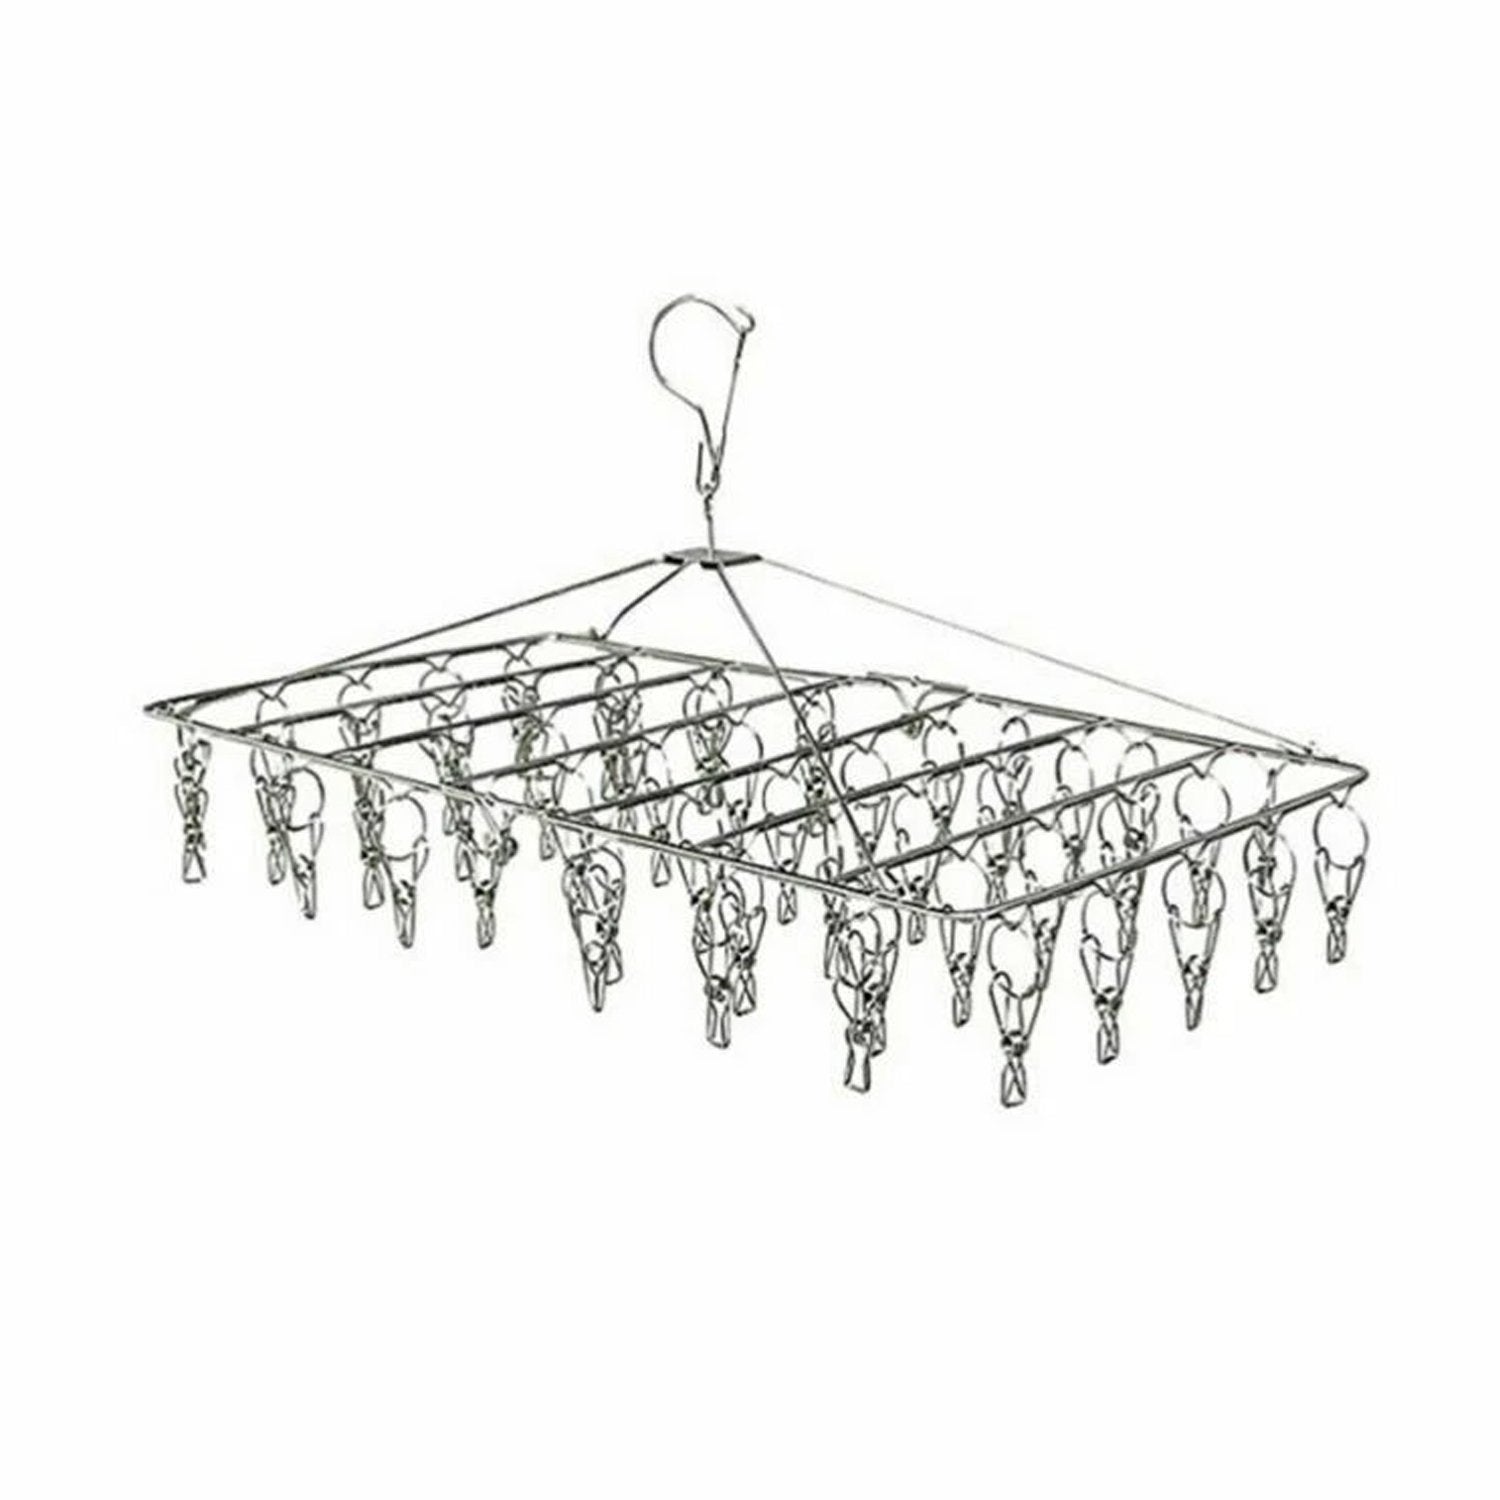 Stainless Steel Clothes Hanger - 52 Pegs